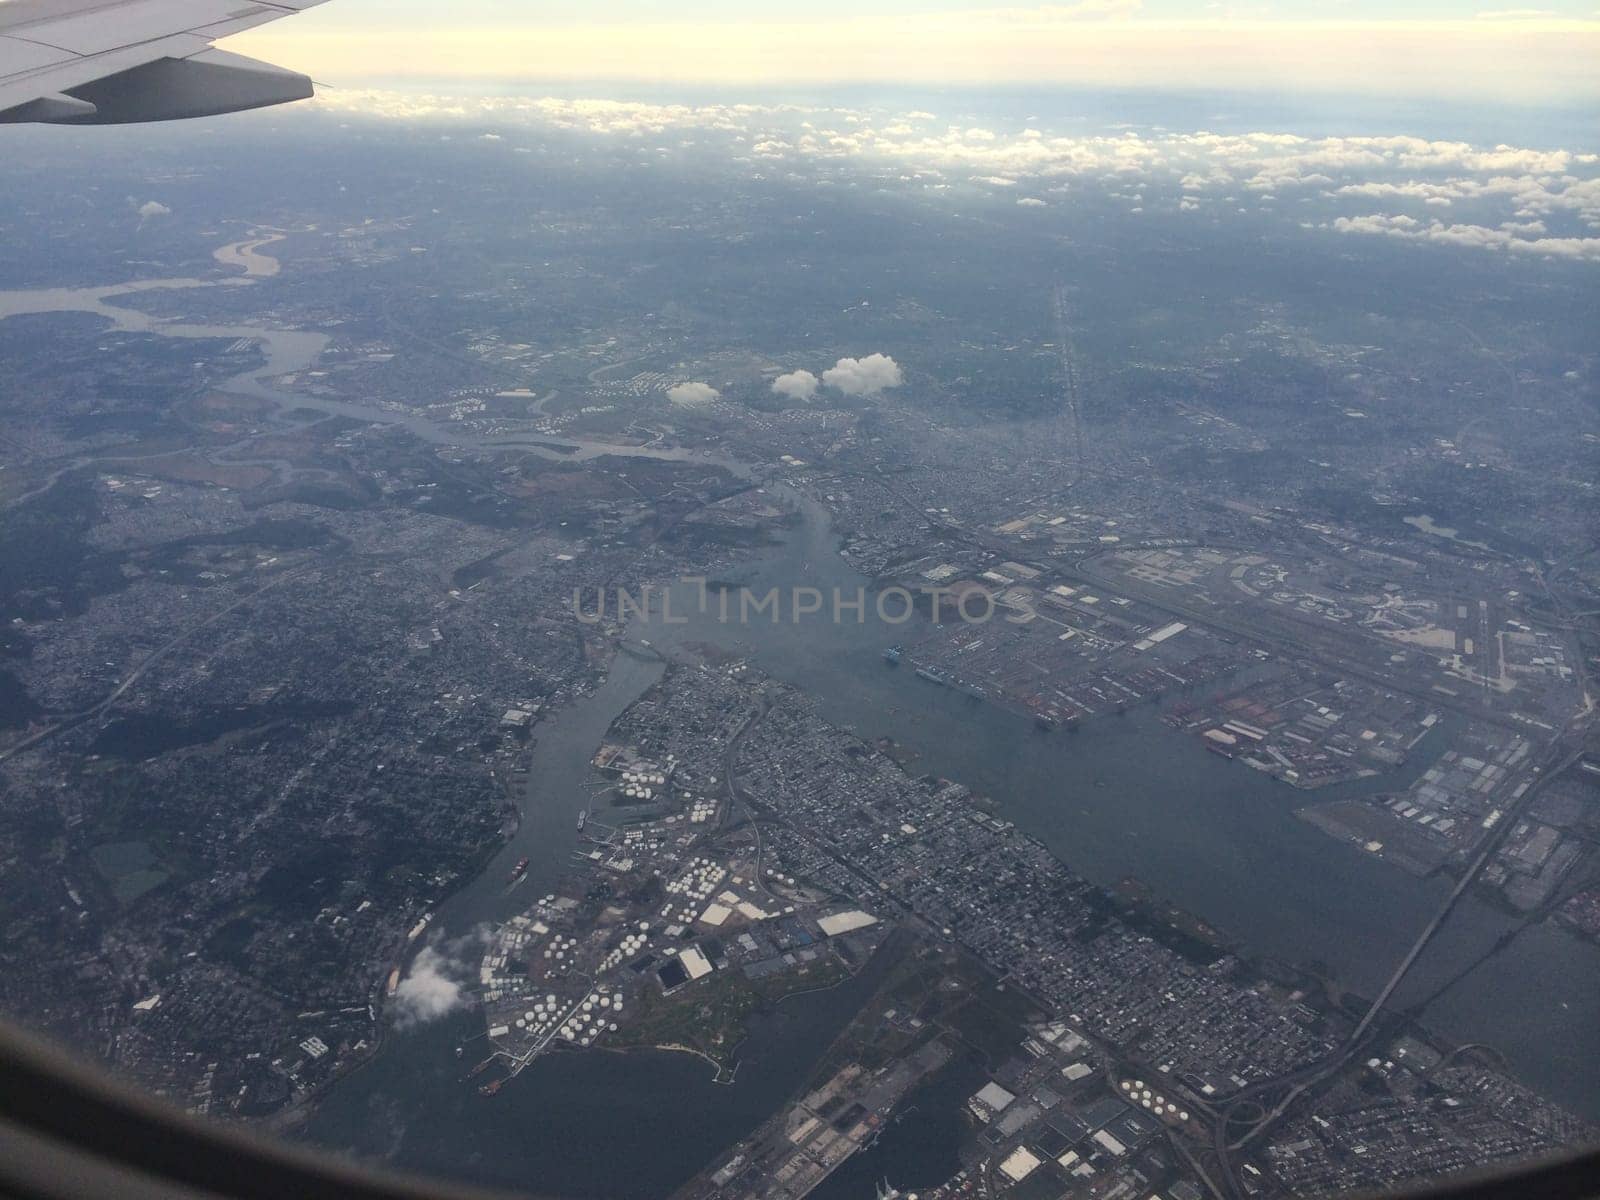 View from Airplane Window flying into New York City . High quality photo